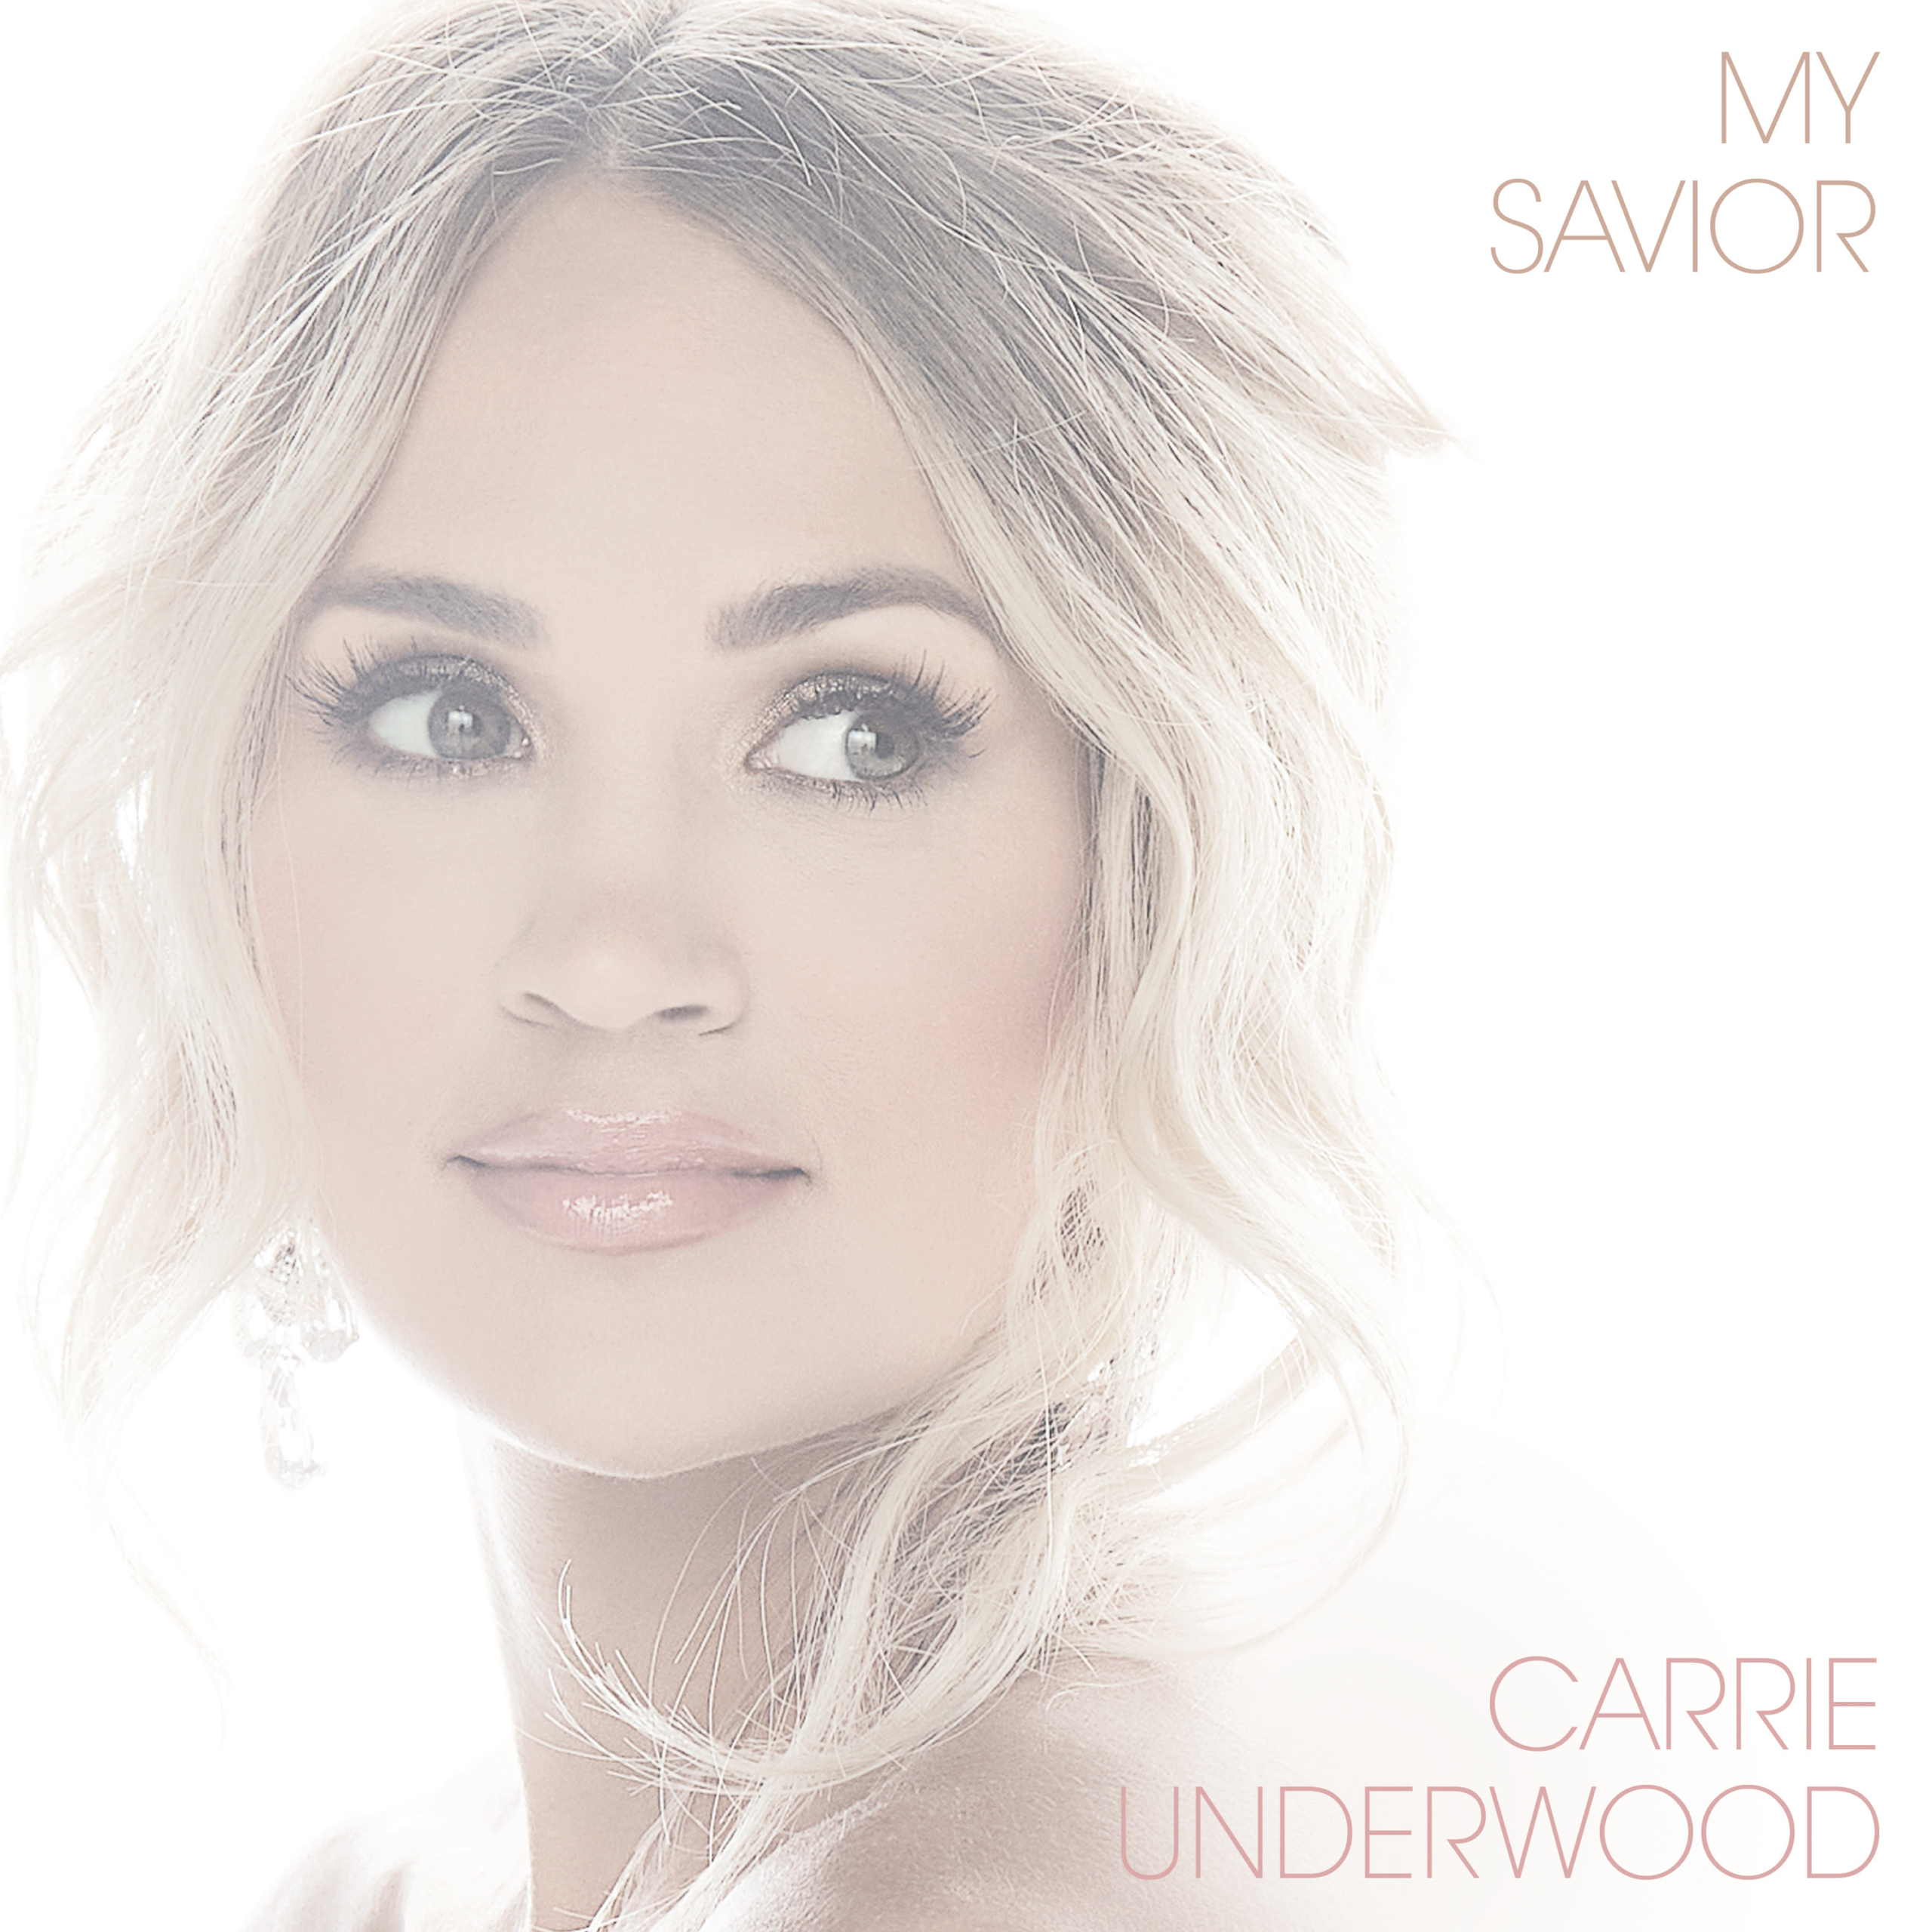 Carrie Underwood's gospel album, 'My Savior' is available now, March 26th